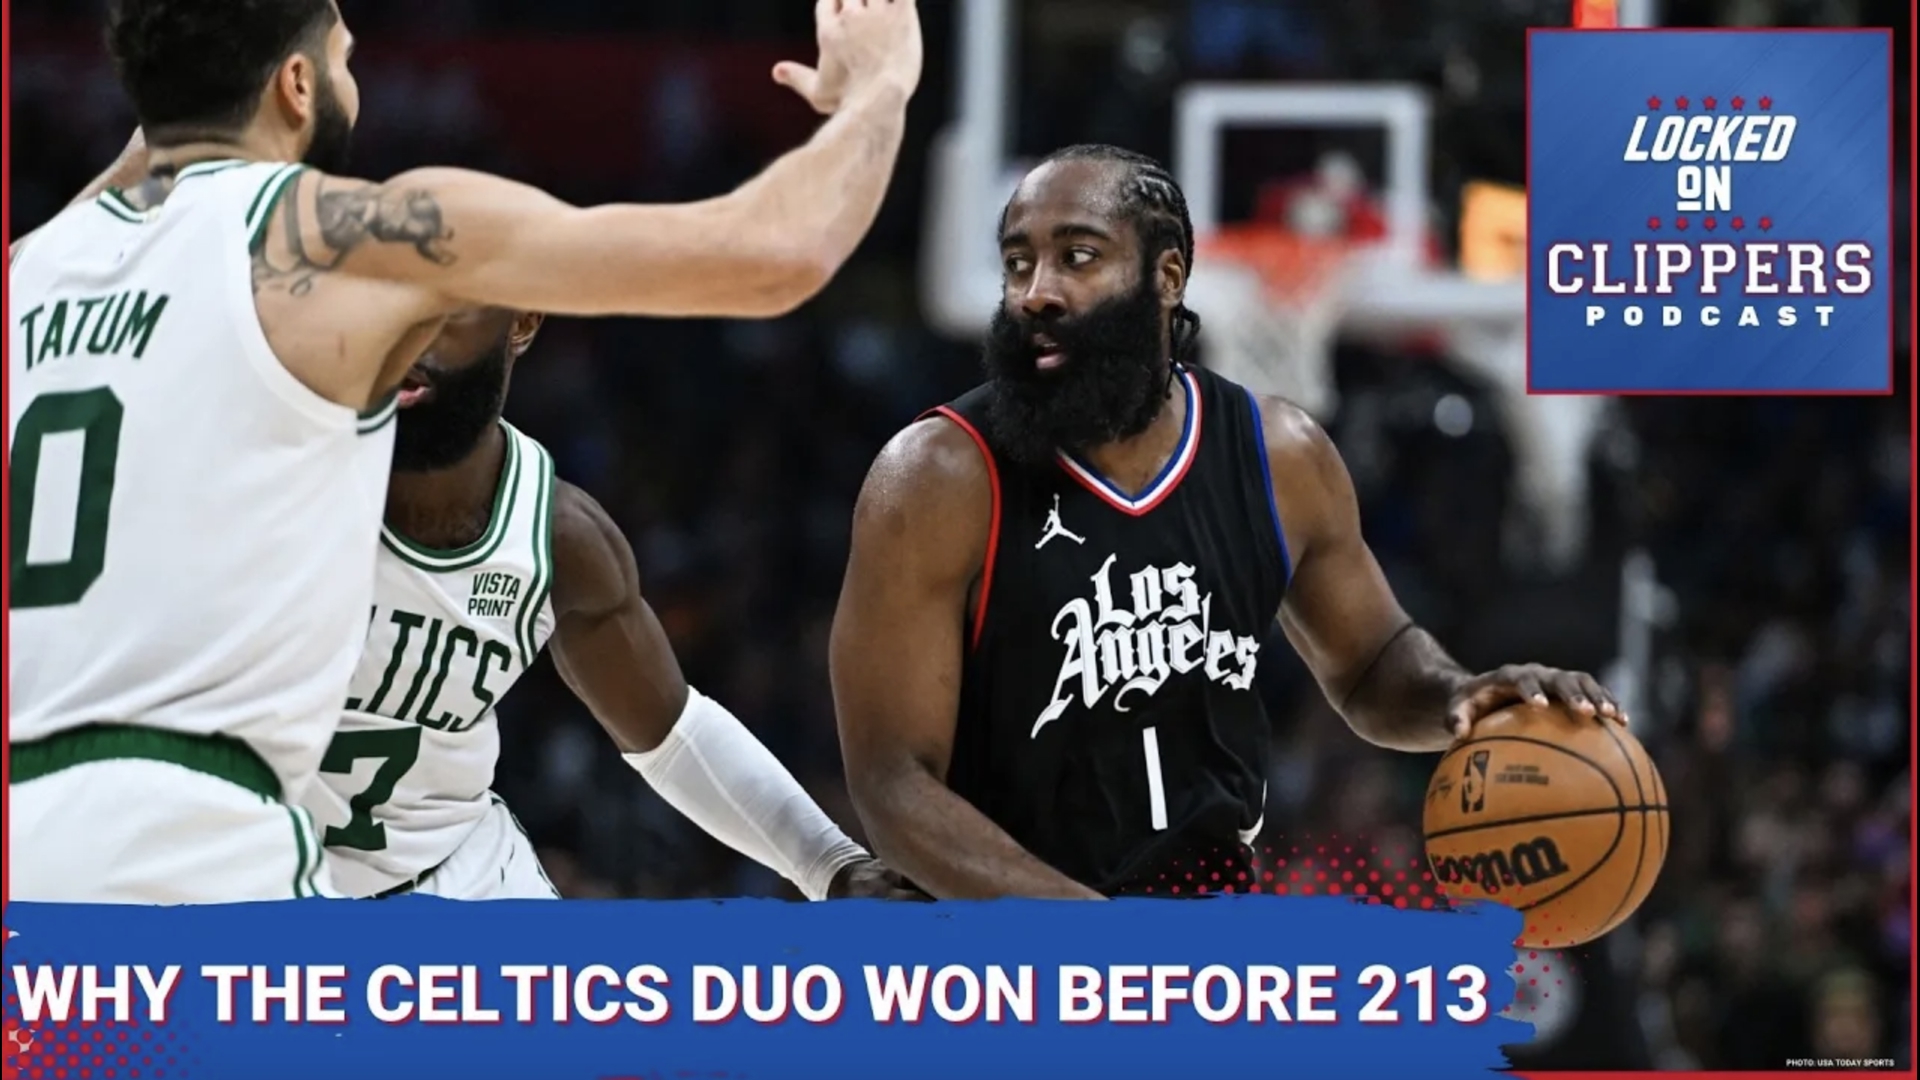 What The Celtics Duo Has That The LA Clippers Version Doesn't